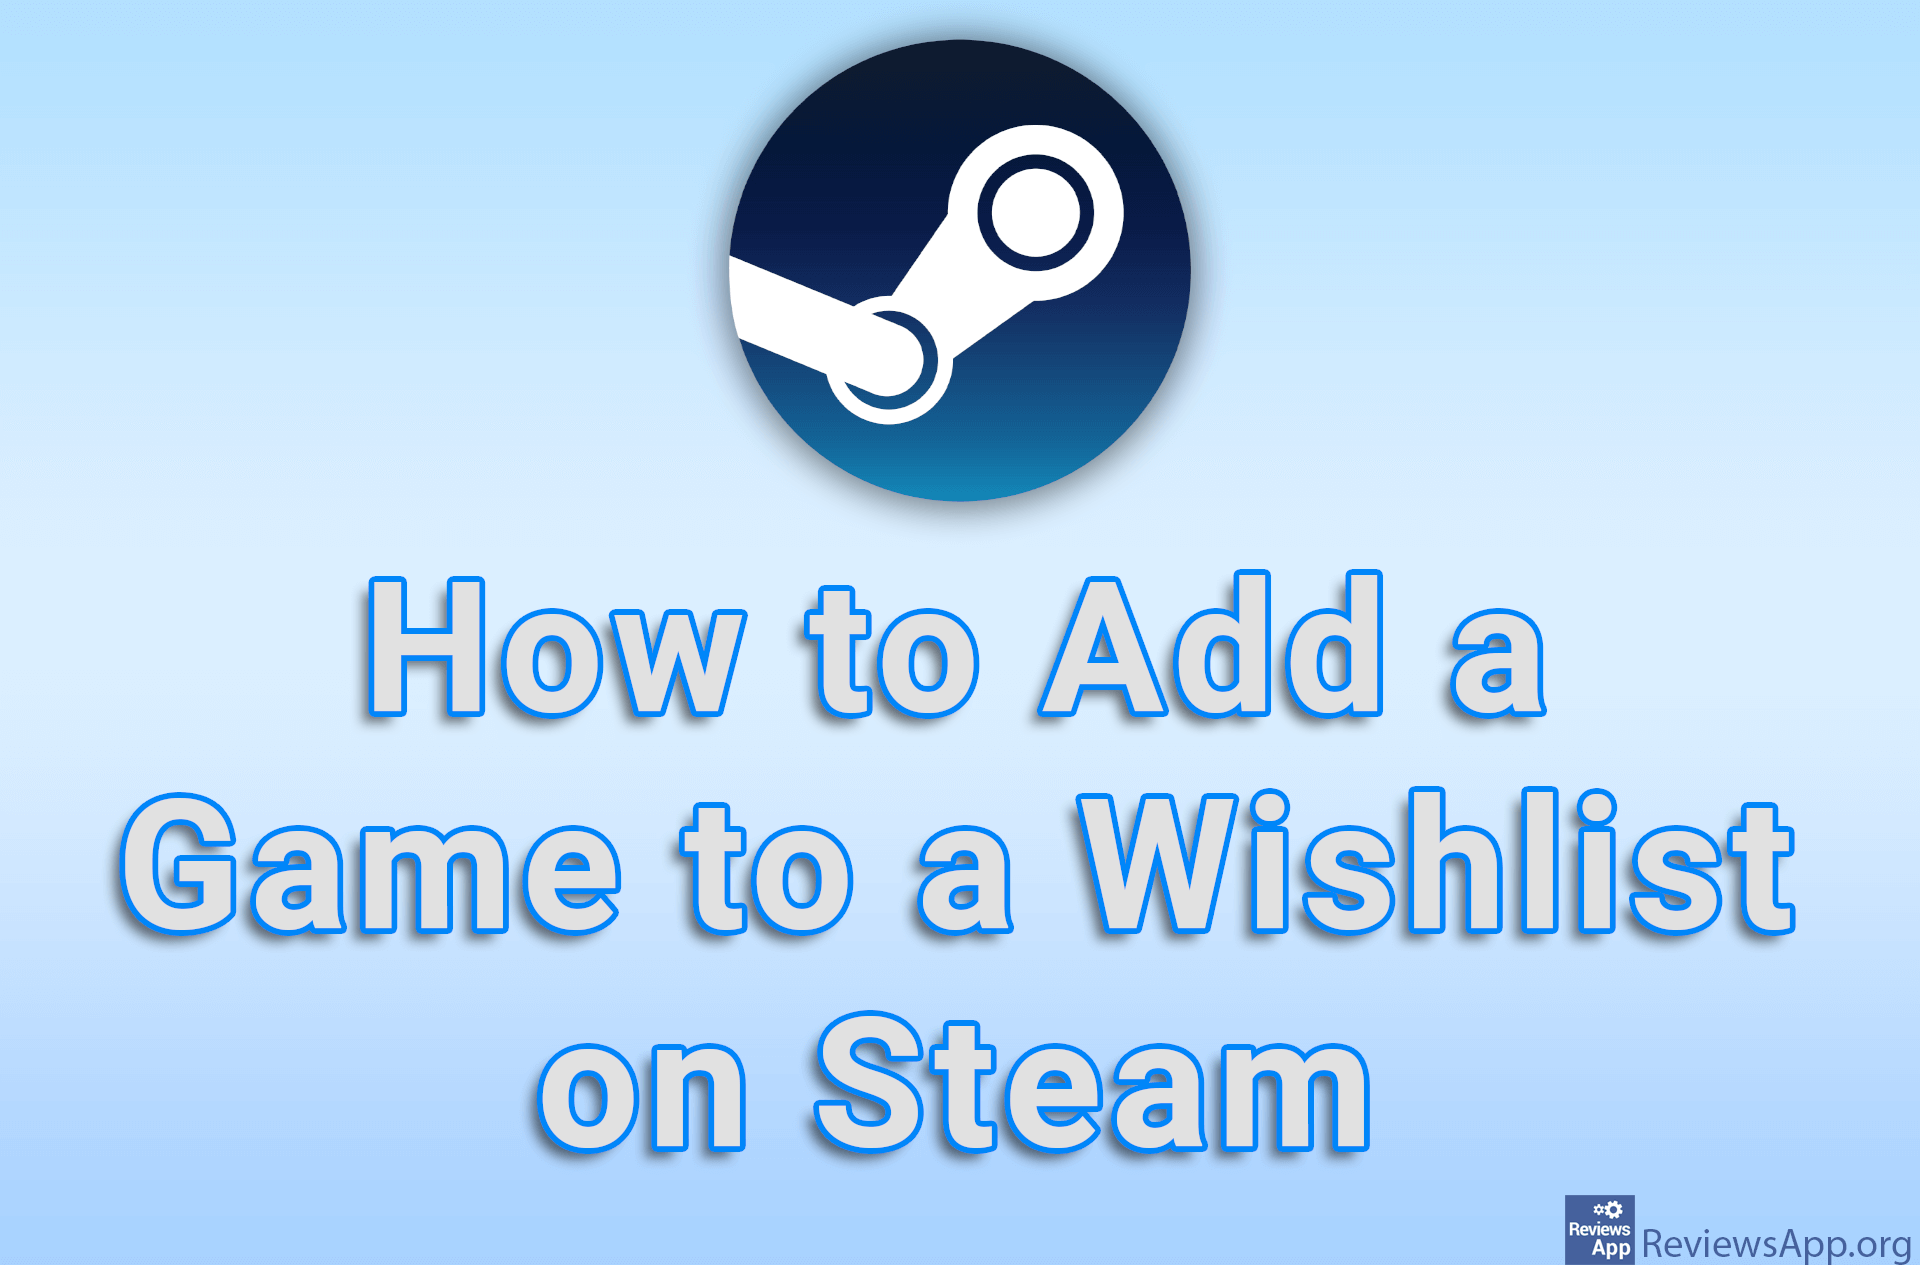 How to Add a Game to a Wishlist on Steam